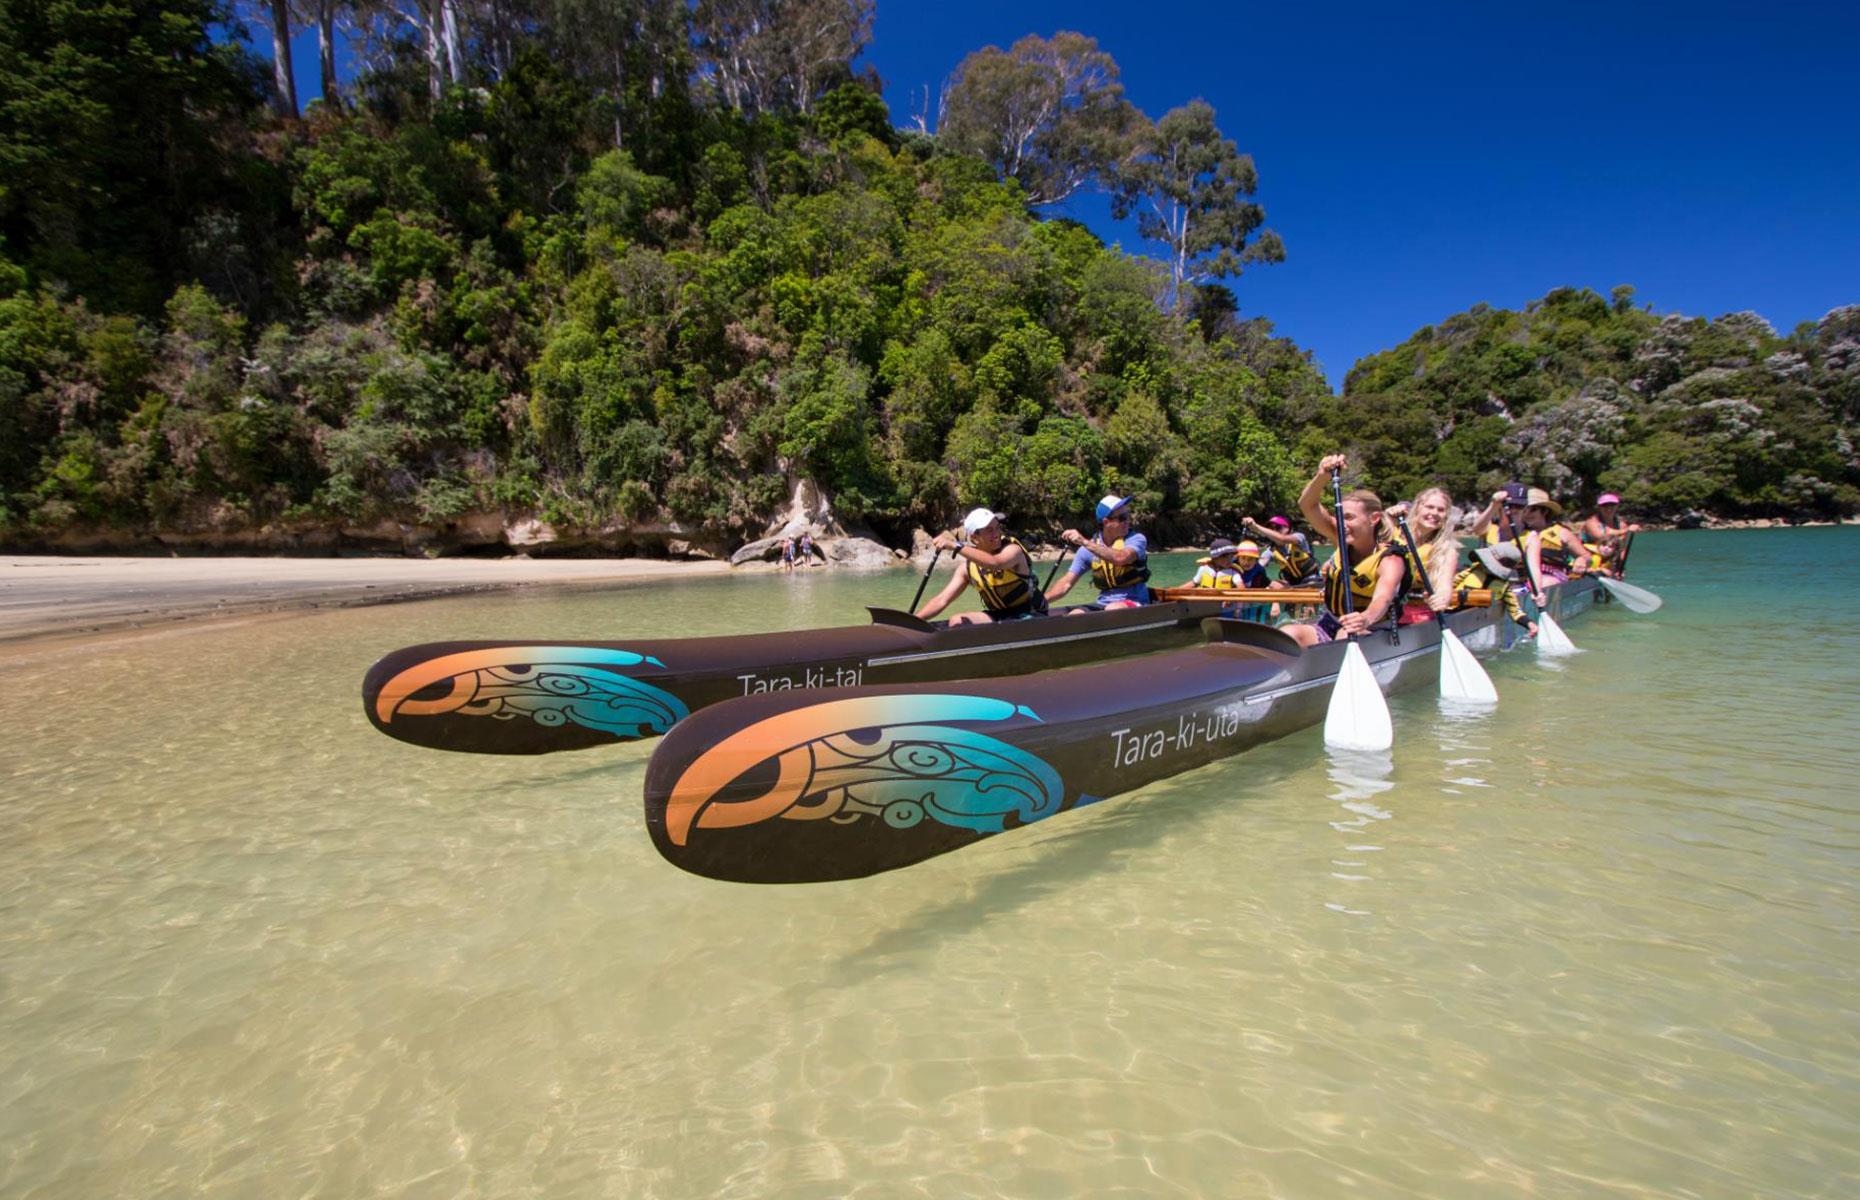 <p>More than 800 years ago Māori arrived in New Zealand on waka (canoes) from eastern Polynesia. Learning about Māori heritage while <a href="https://wakaabeltasman.nz/">paddling as a team</a> along the beautiful Abel Tasman coast in single or double-hulled outrigger canoes is a special experience. Visitors learn the etiquette (tikanga) associated with waka before beginning the journey along the coast to Split Apple Rock. All trips also begin and end with a blessing (karakia) for protection.</p>